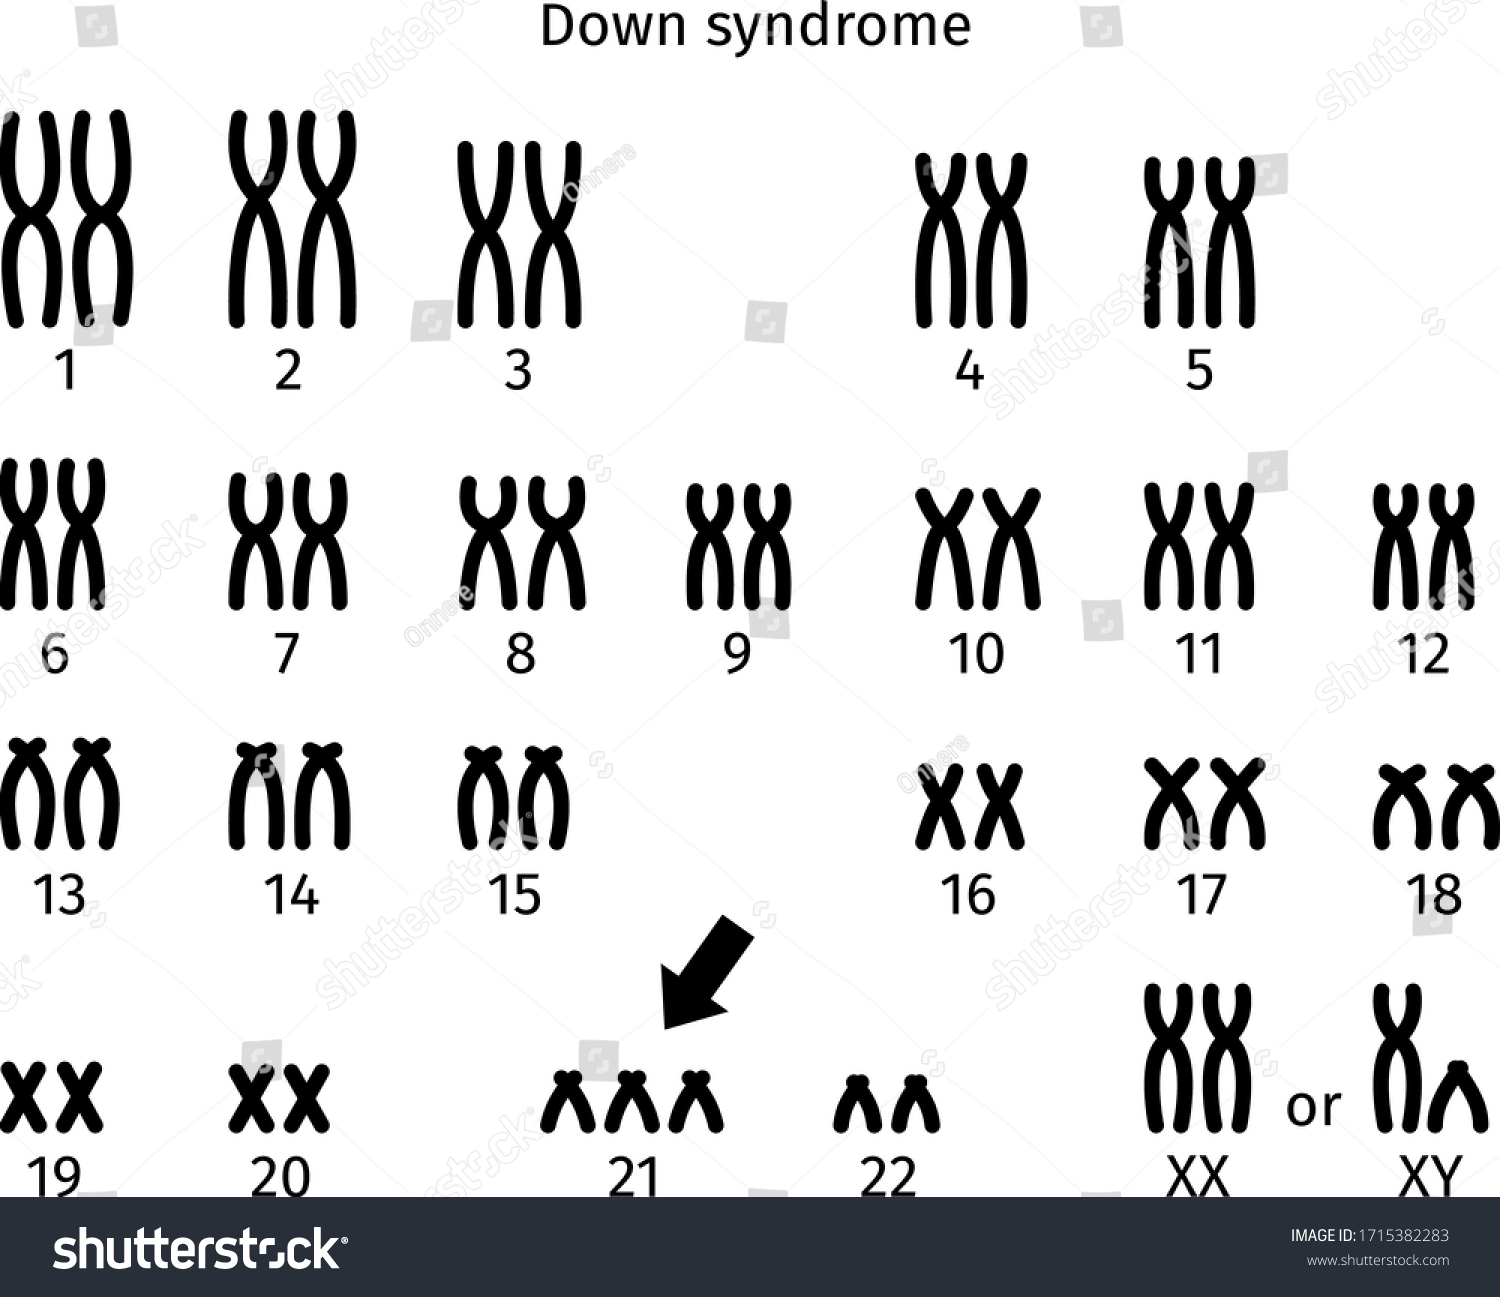 Scheme Of Down Syndrome Karyotype Of Human Royalty Free Stock Vector 1715382283 8467